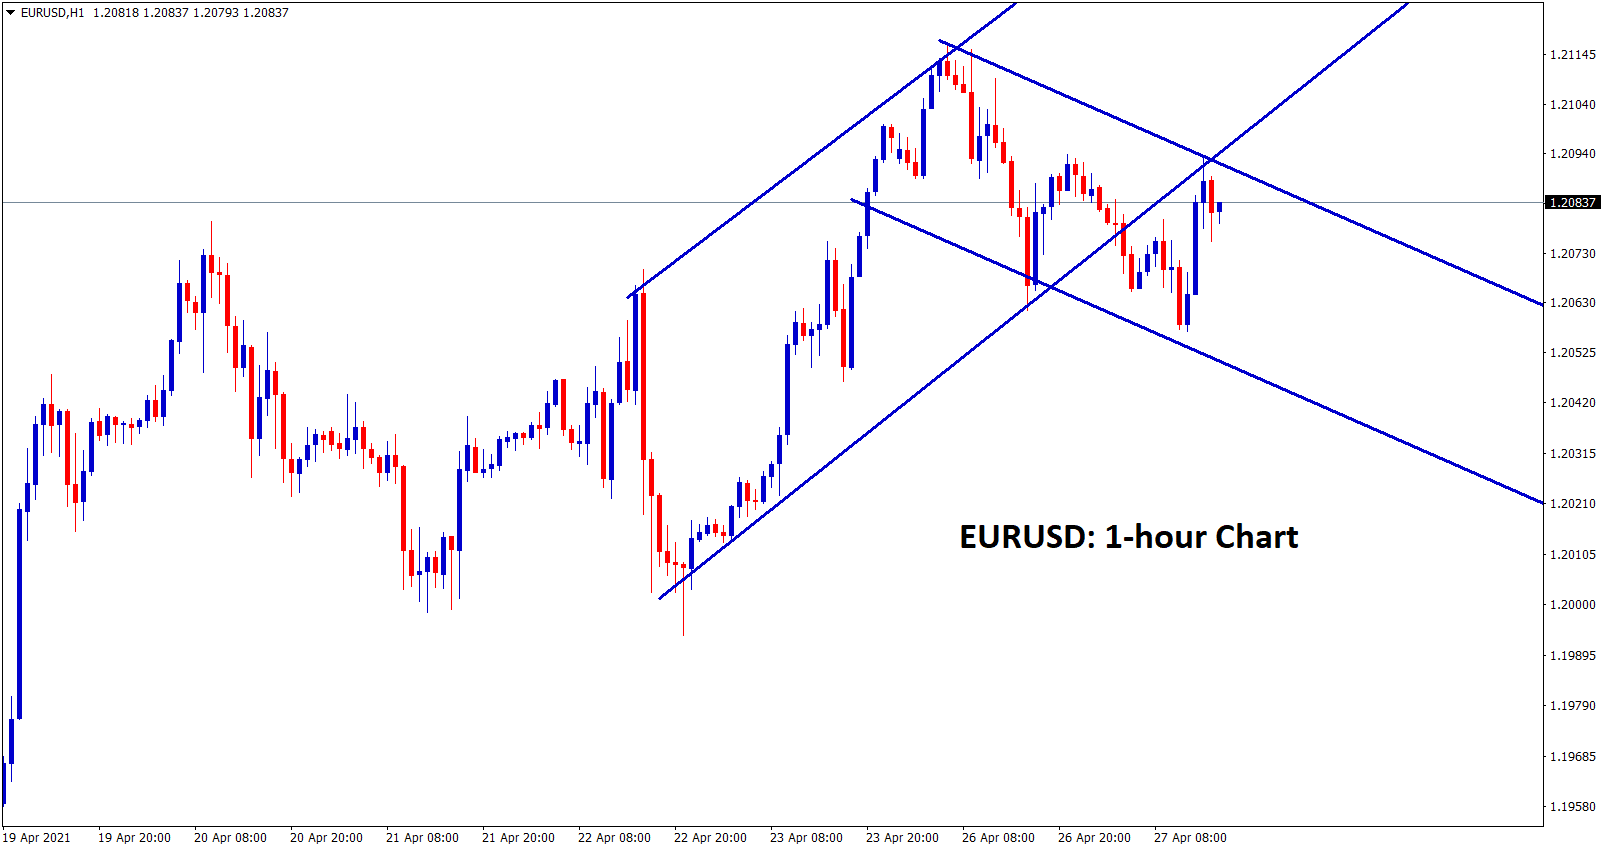 EURUSD moving between the channel ranges